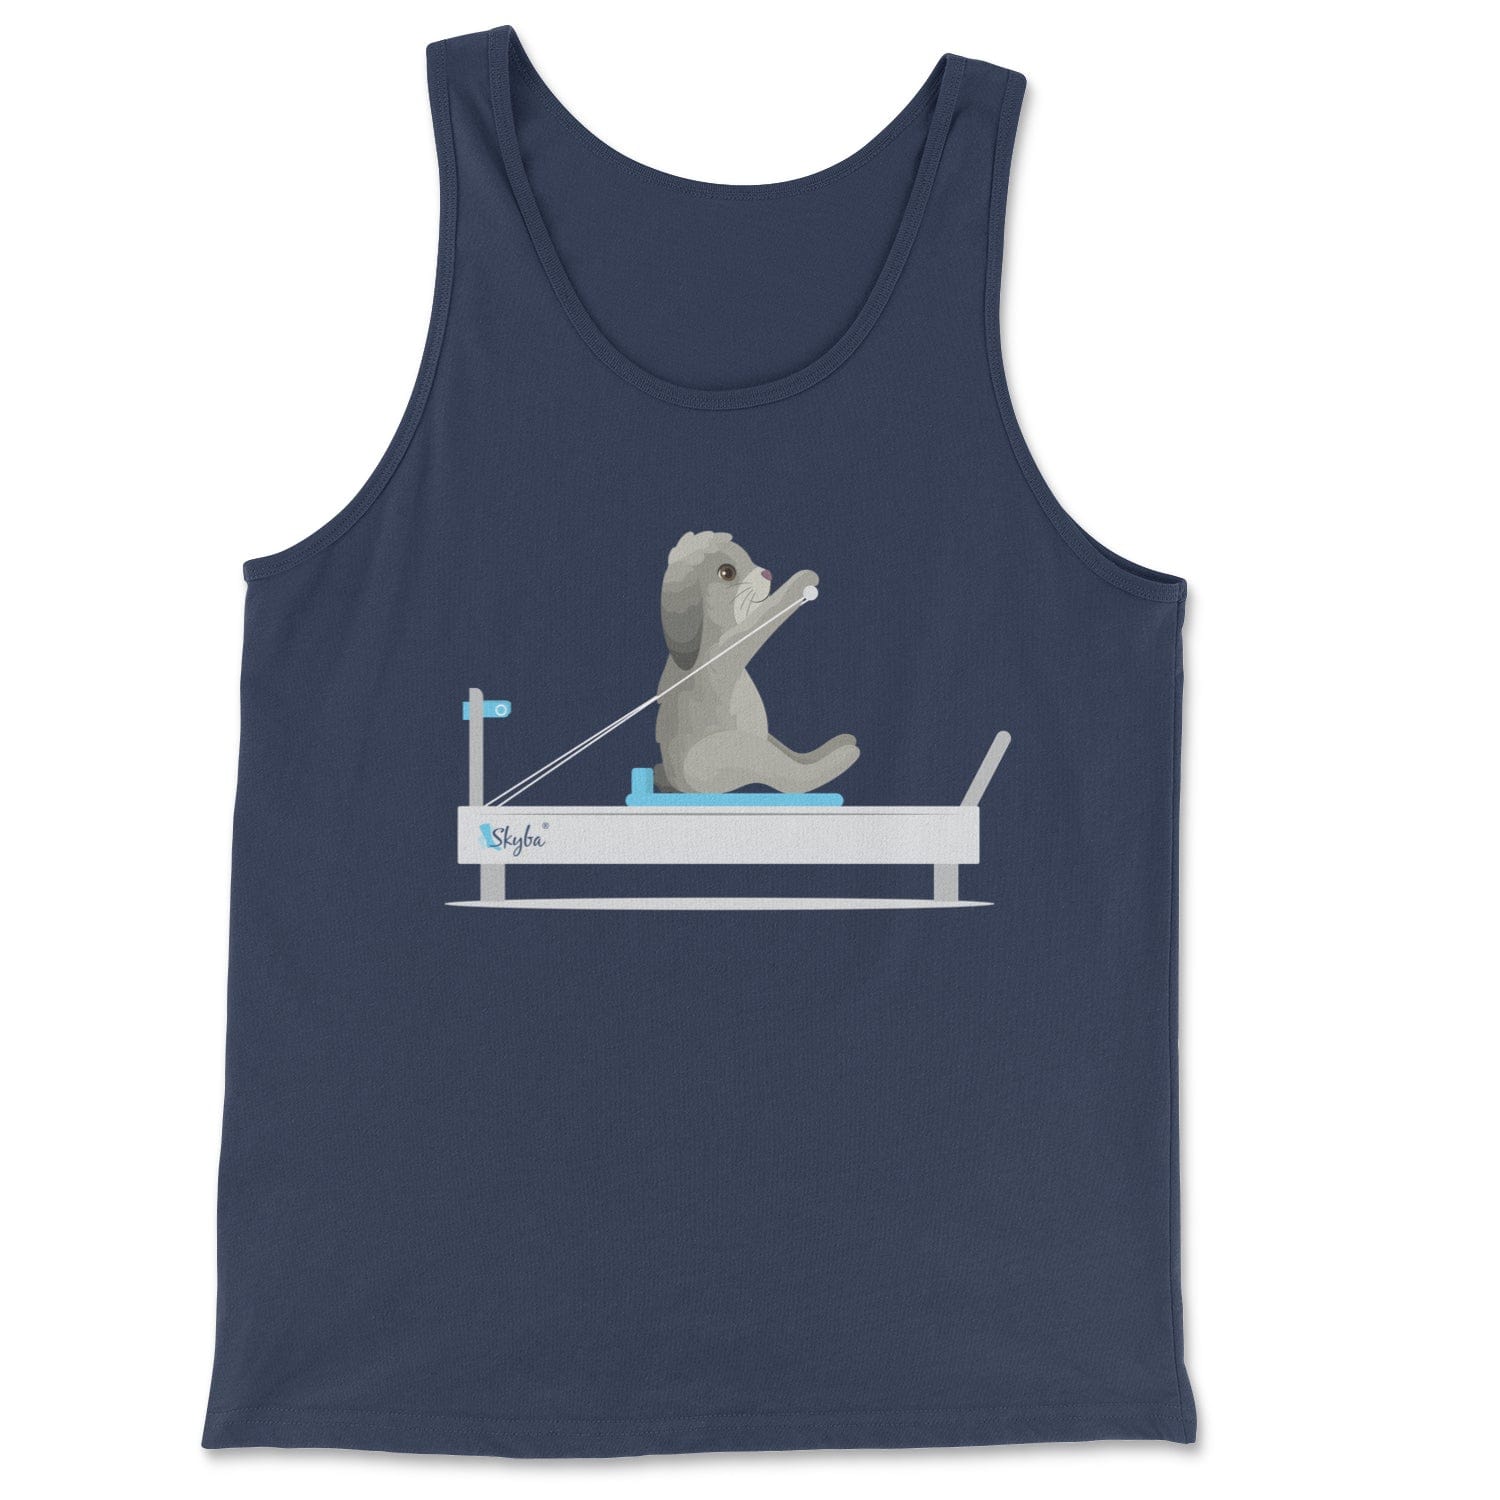 Rabbit on the Reformer - Classic Tank Skyba Print Material